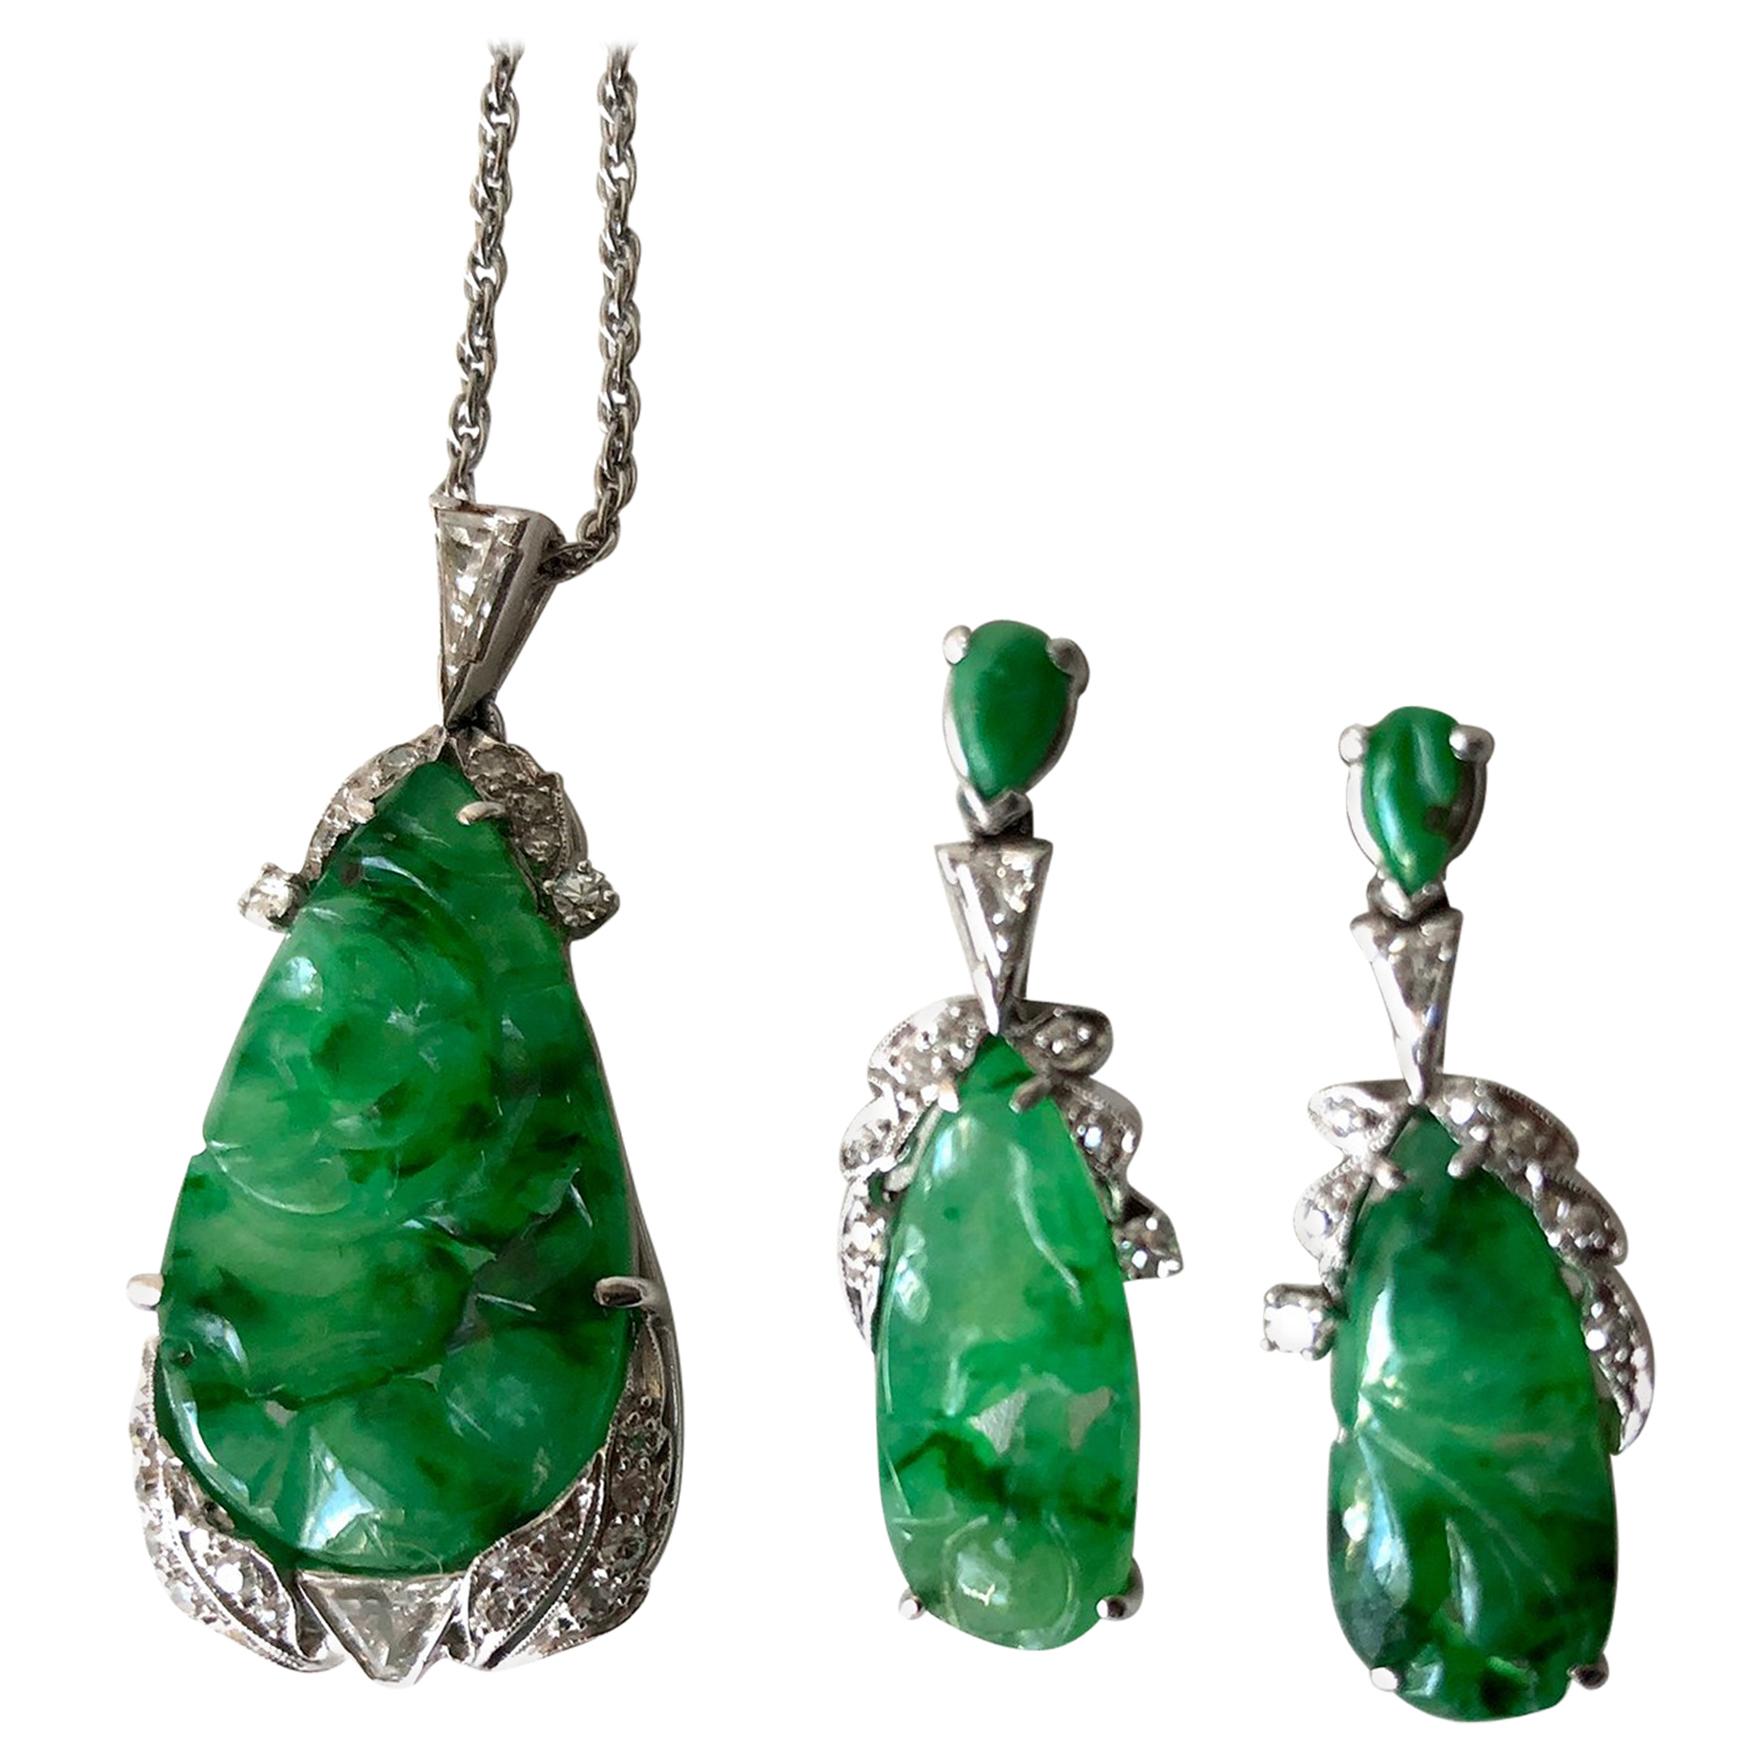 1950s White Gold Diamond Carved Jade Necklace Earrings Set